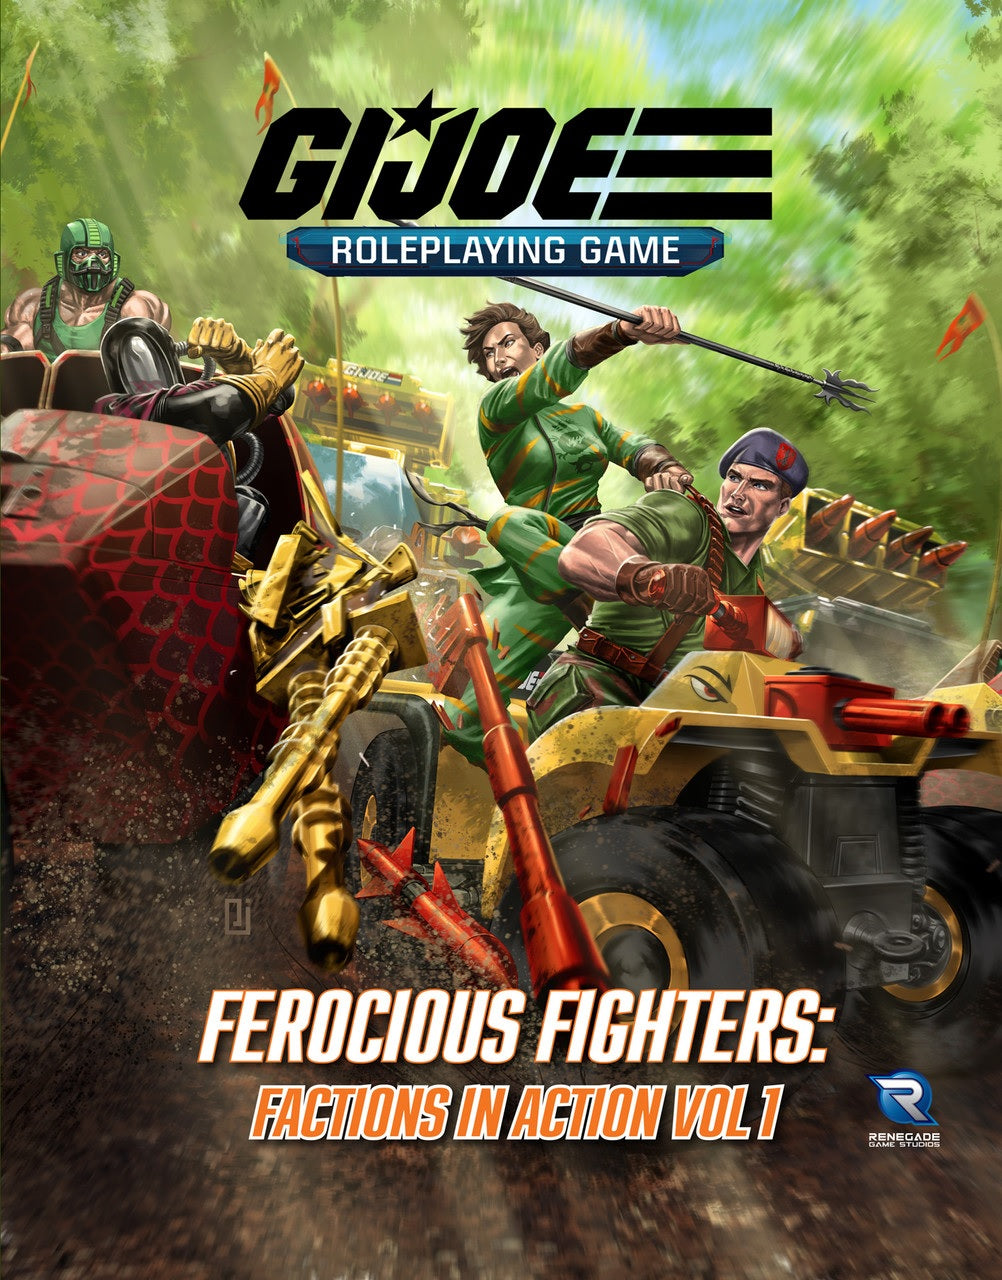 G.I. JOE RPG FACTIONS IN ACTION SOURCEBOOK V1 | The CG Realm